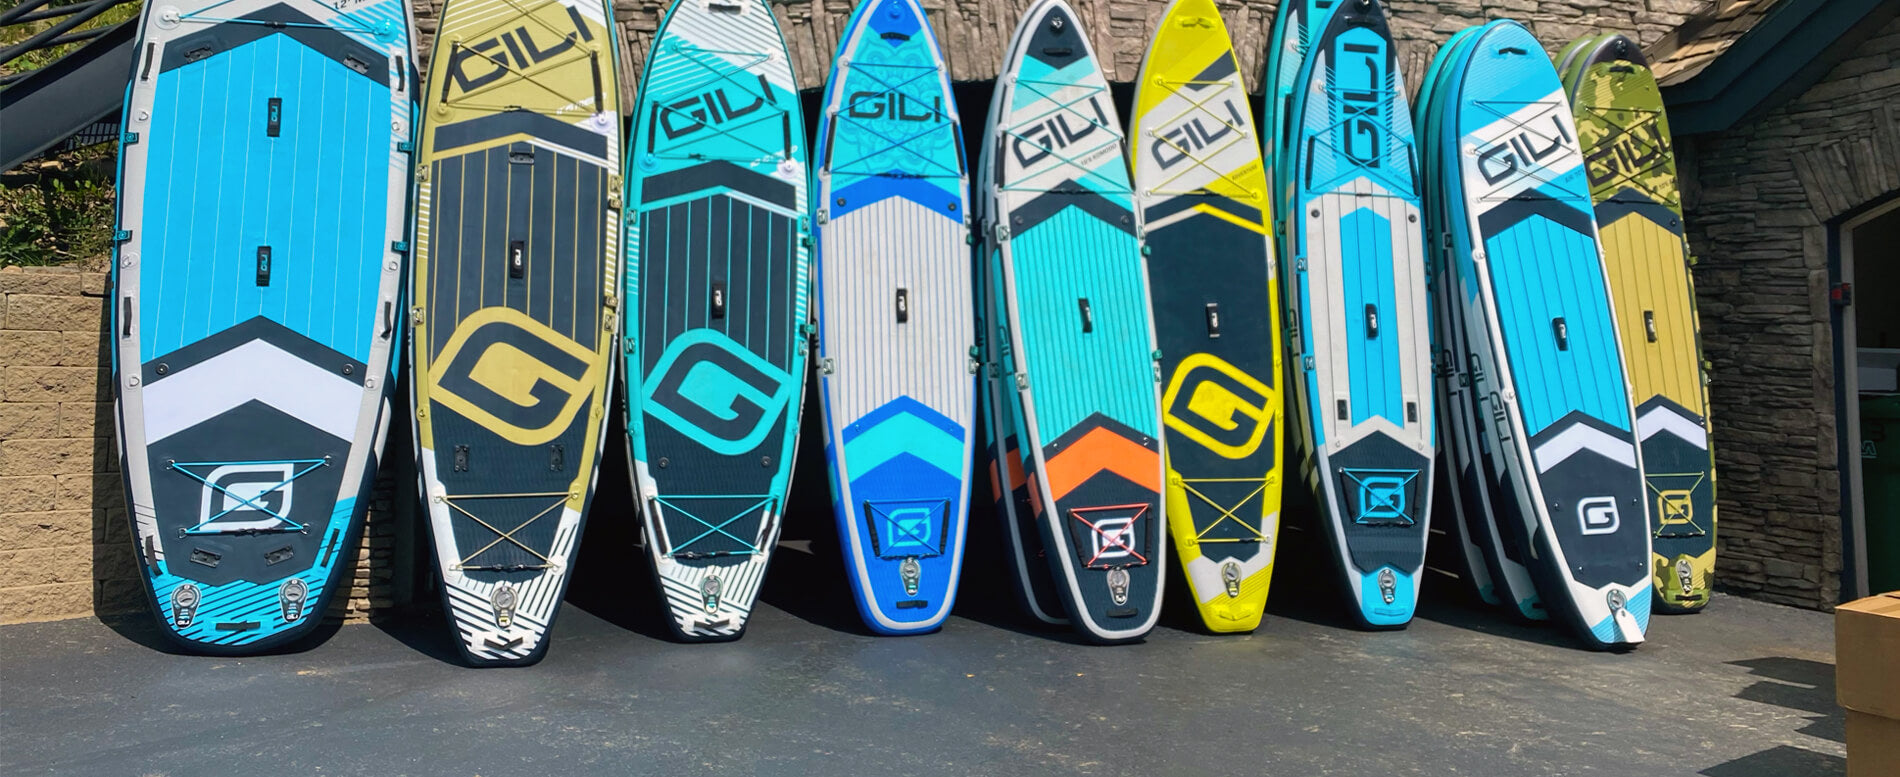 GILI inflatable used paddle boards for sale